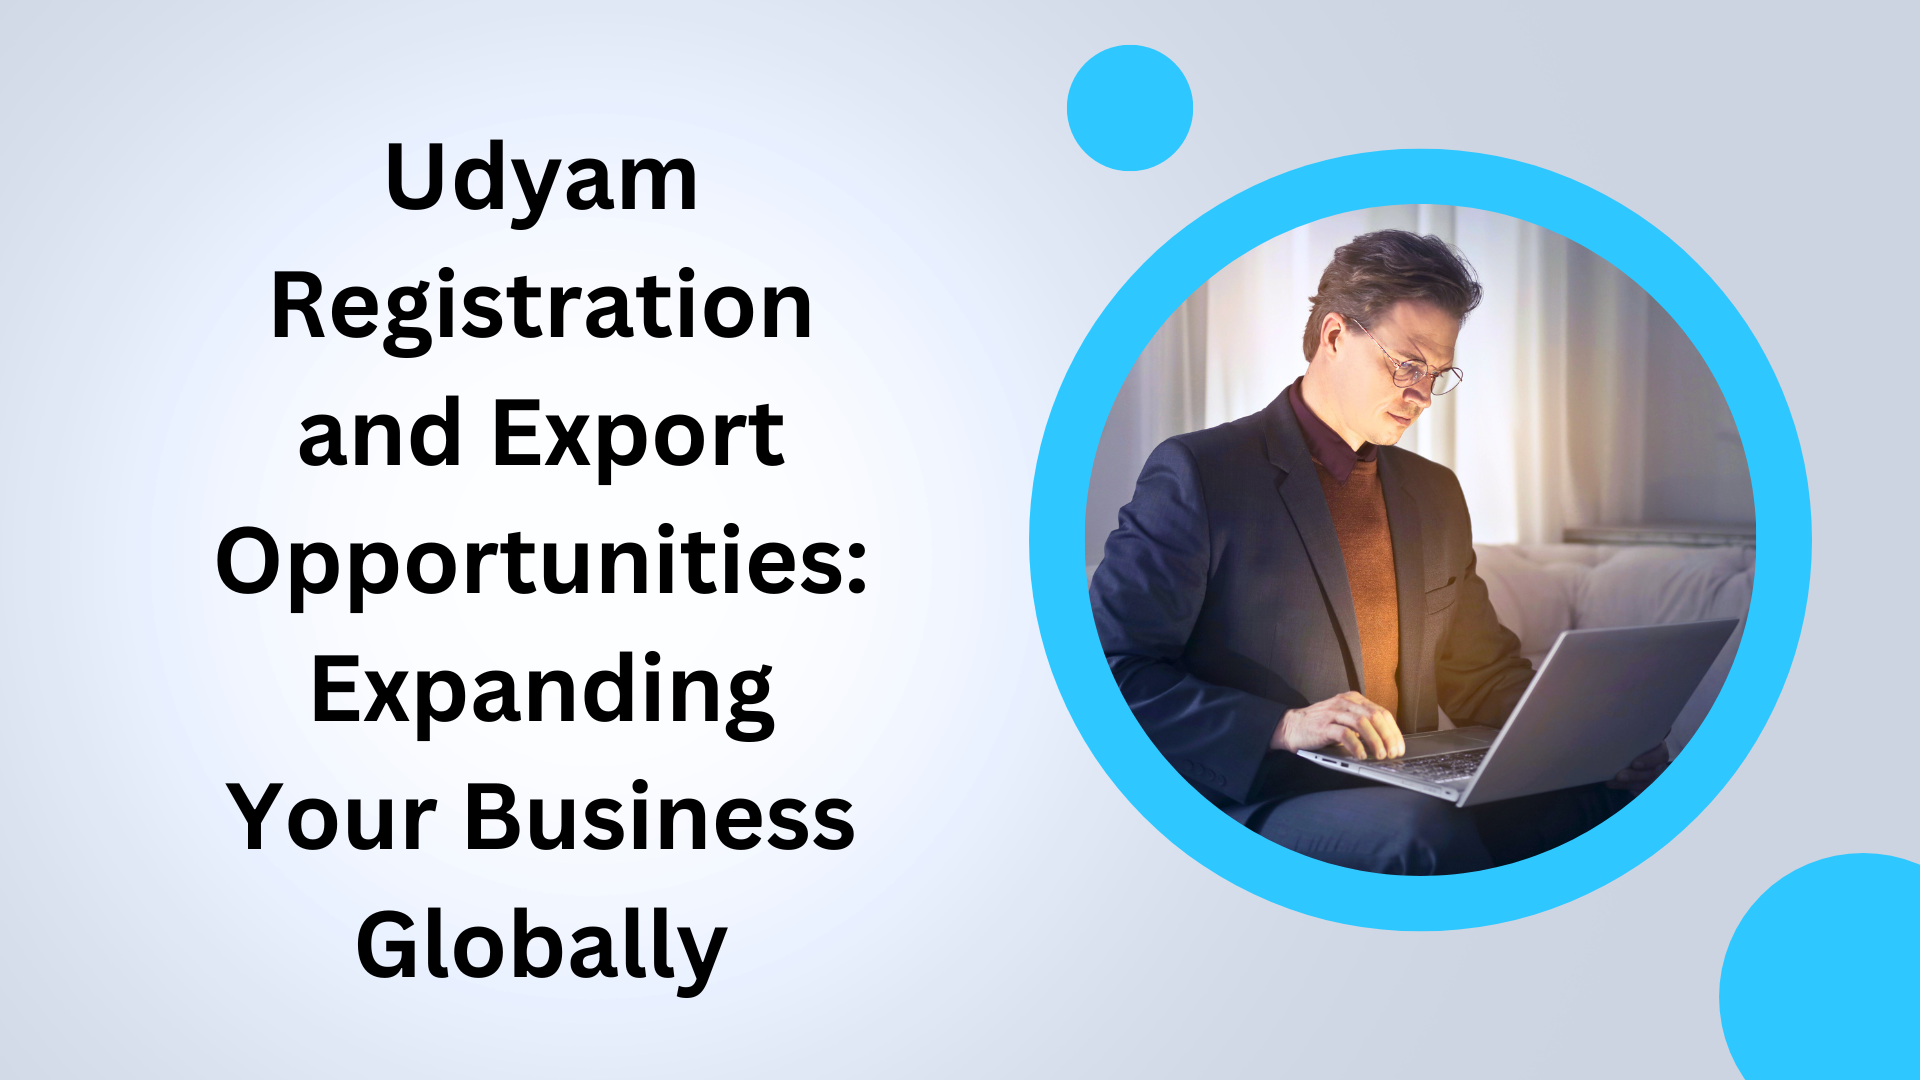 Udyam Registration and Export Opportunities Expanding Your Business Globally